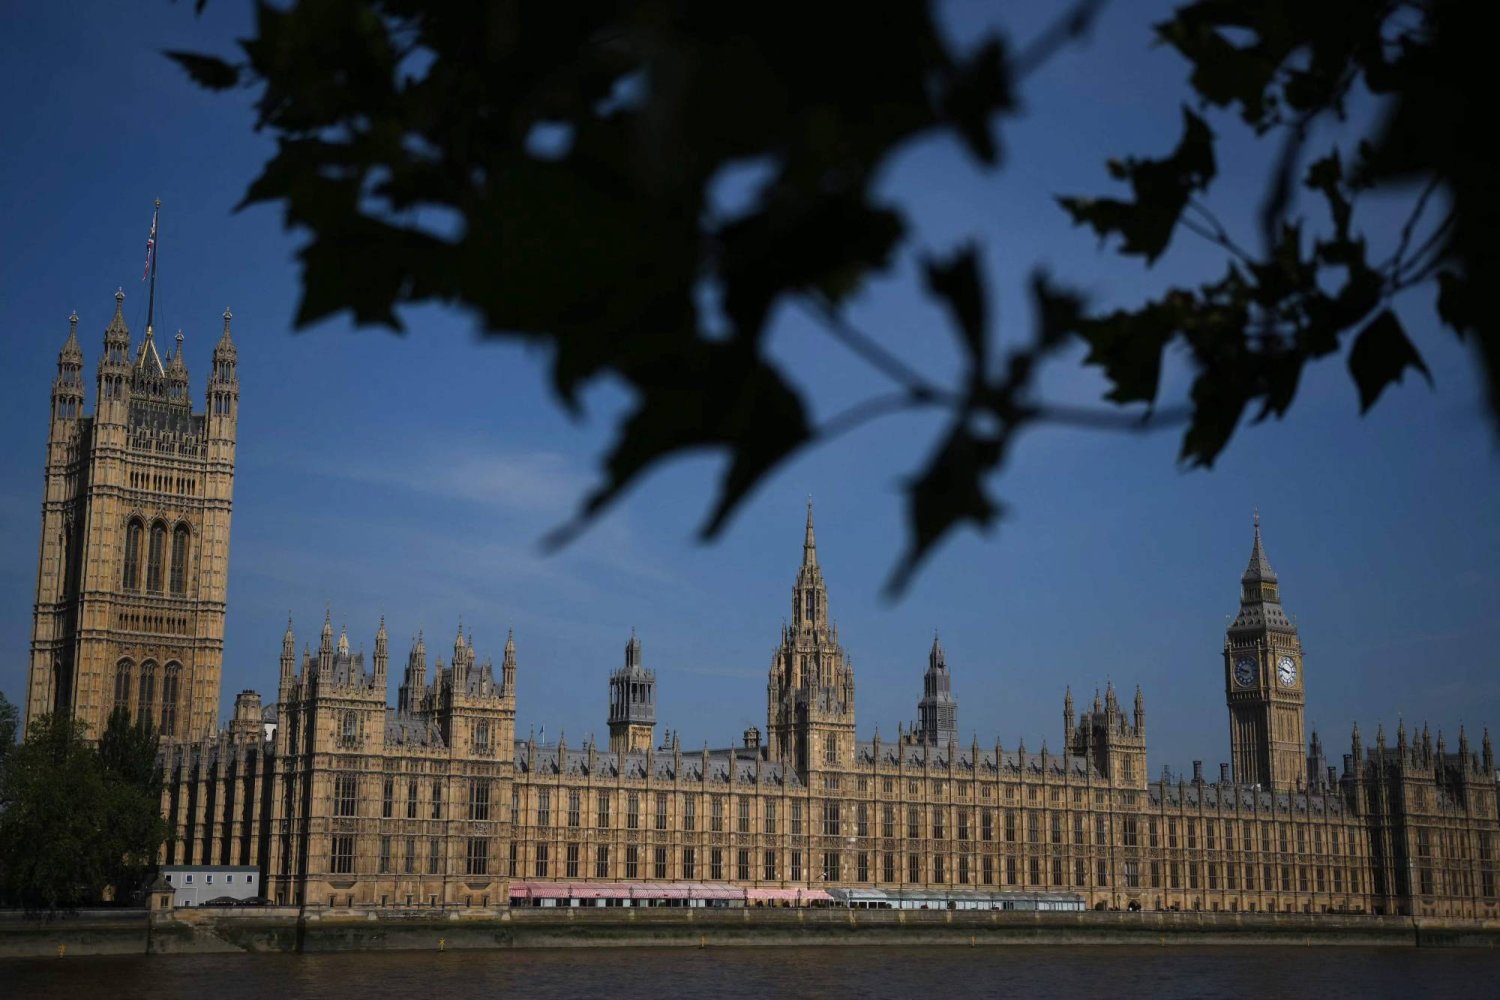 A general view shows Palace of Westminster, home to the Houses of Parliament, and the Elizabeth Tower, commonly known by the name of the bell "Big Ben", in London on June 15, 2023. (Photo by Daniel LEAL / AFP)